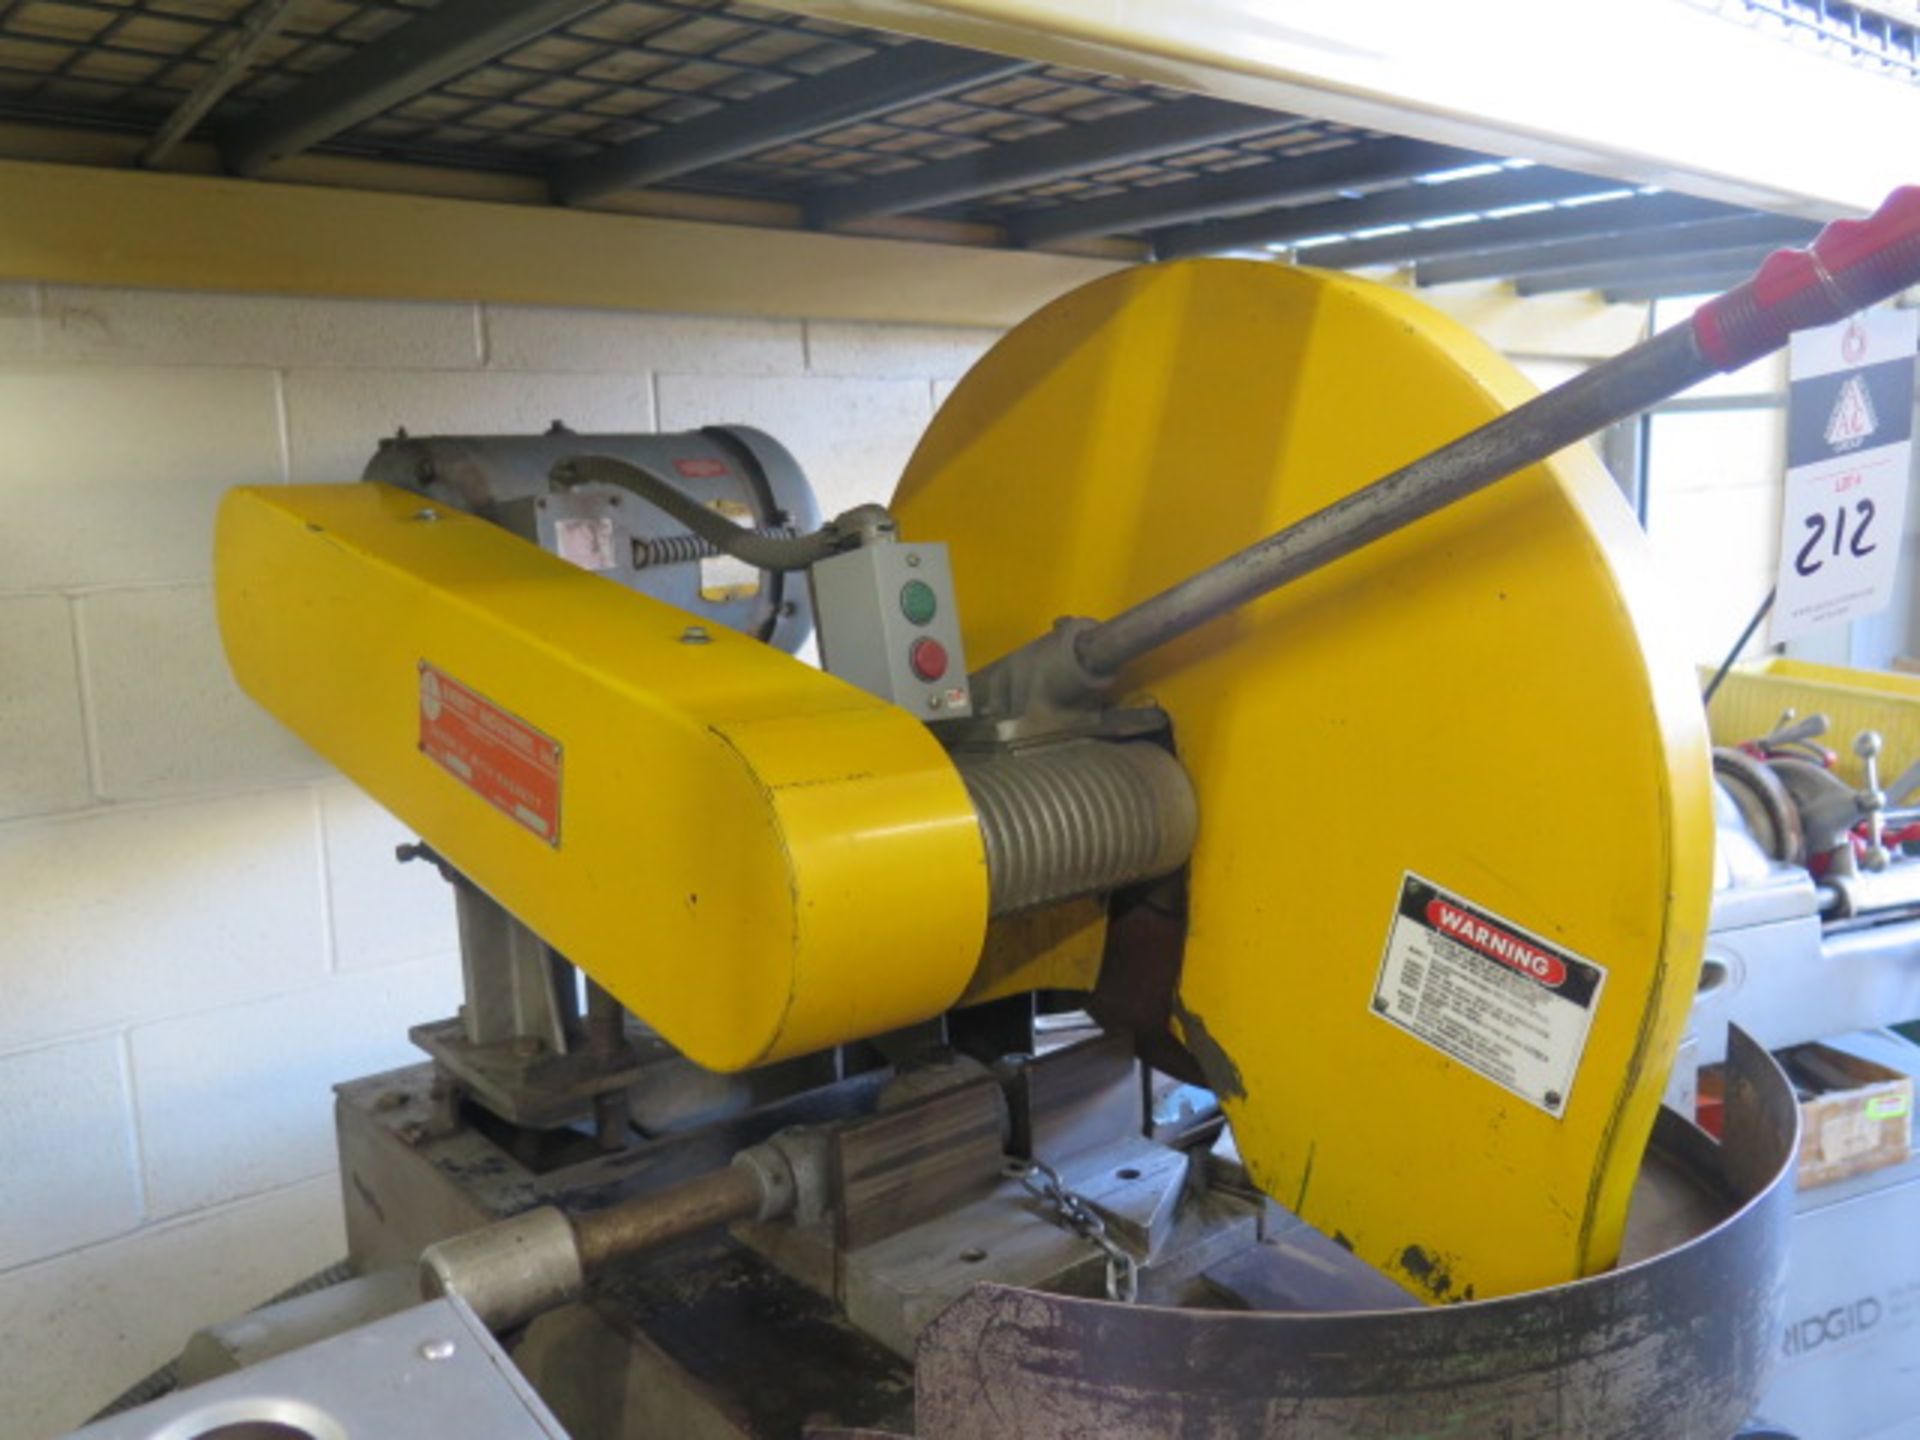 Everett mdl. 20AA22 20" Abrasive Miter Cutoff Saw s/n 6828-2 w/ Pneumatic Chain Clamping (SOLD AS-IS - Image 8 of 10